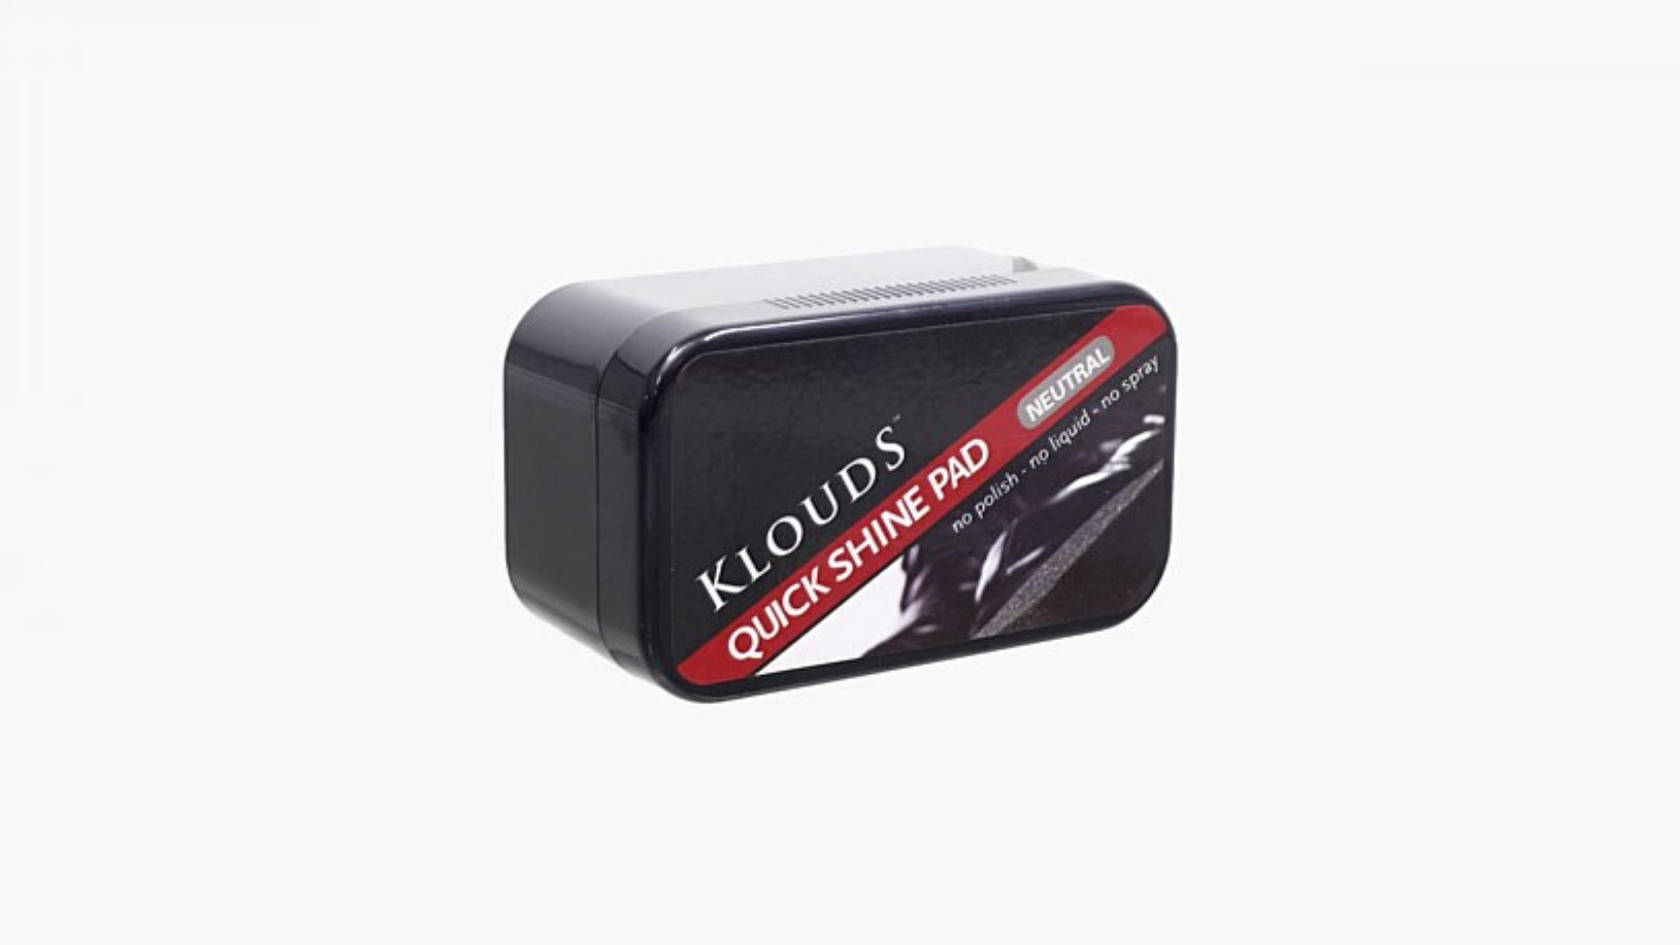 Klouds brand Quick Shine Sponge pad box against a neutral background